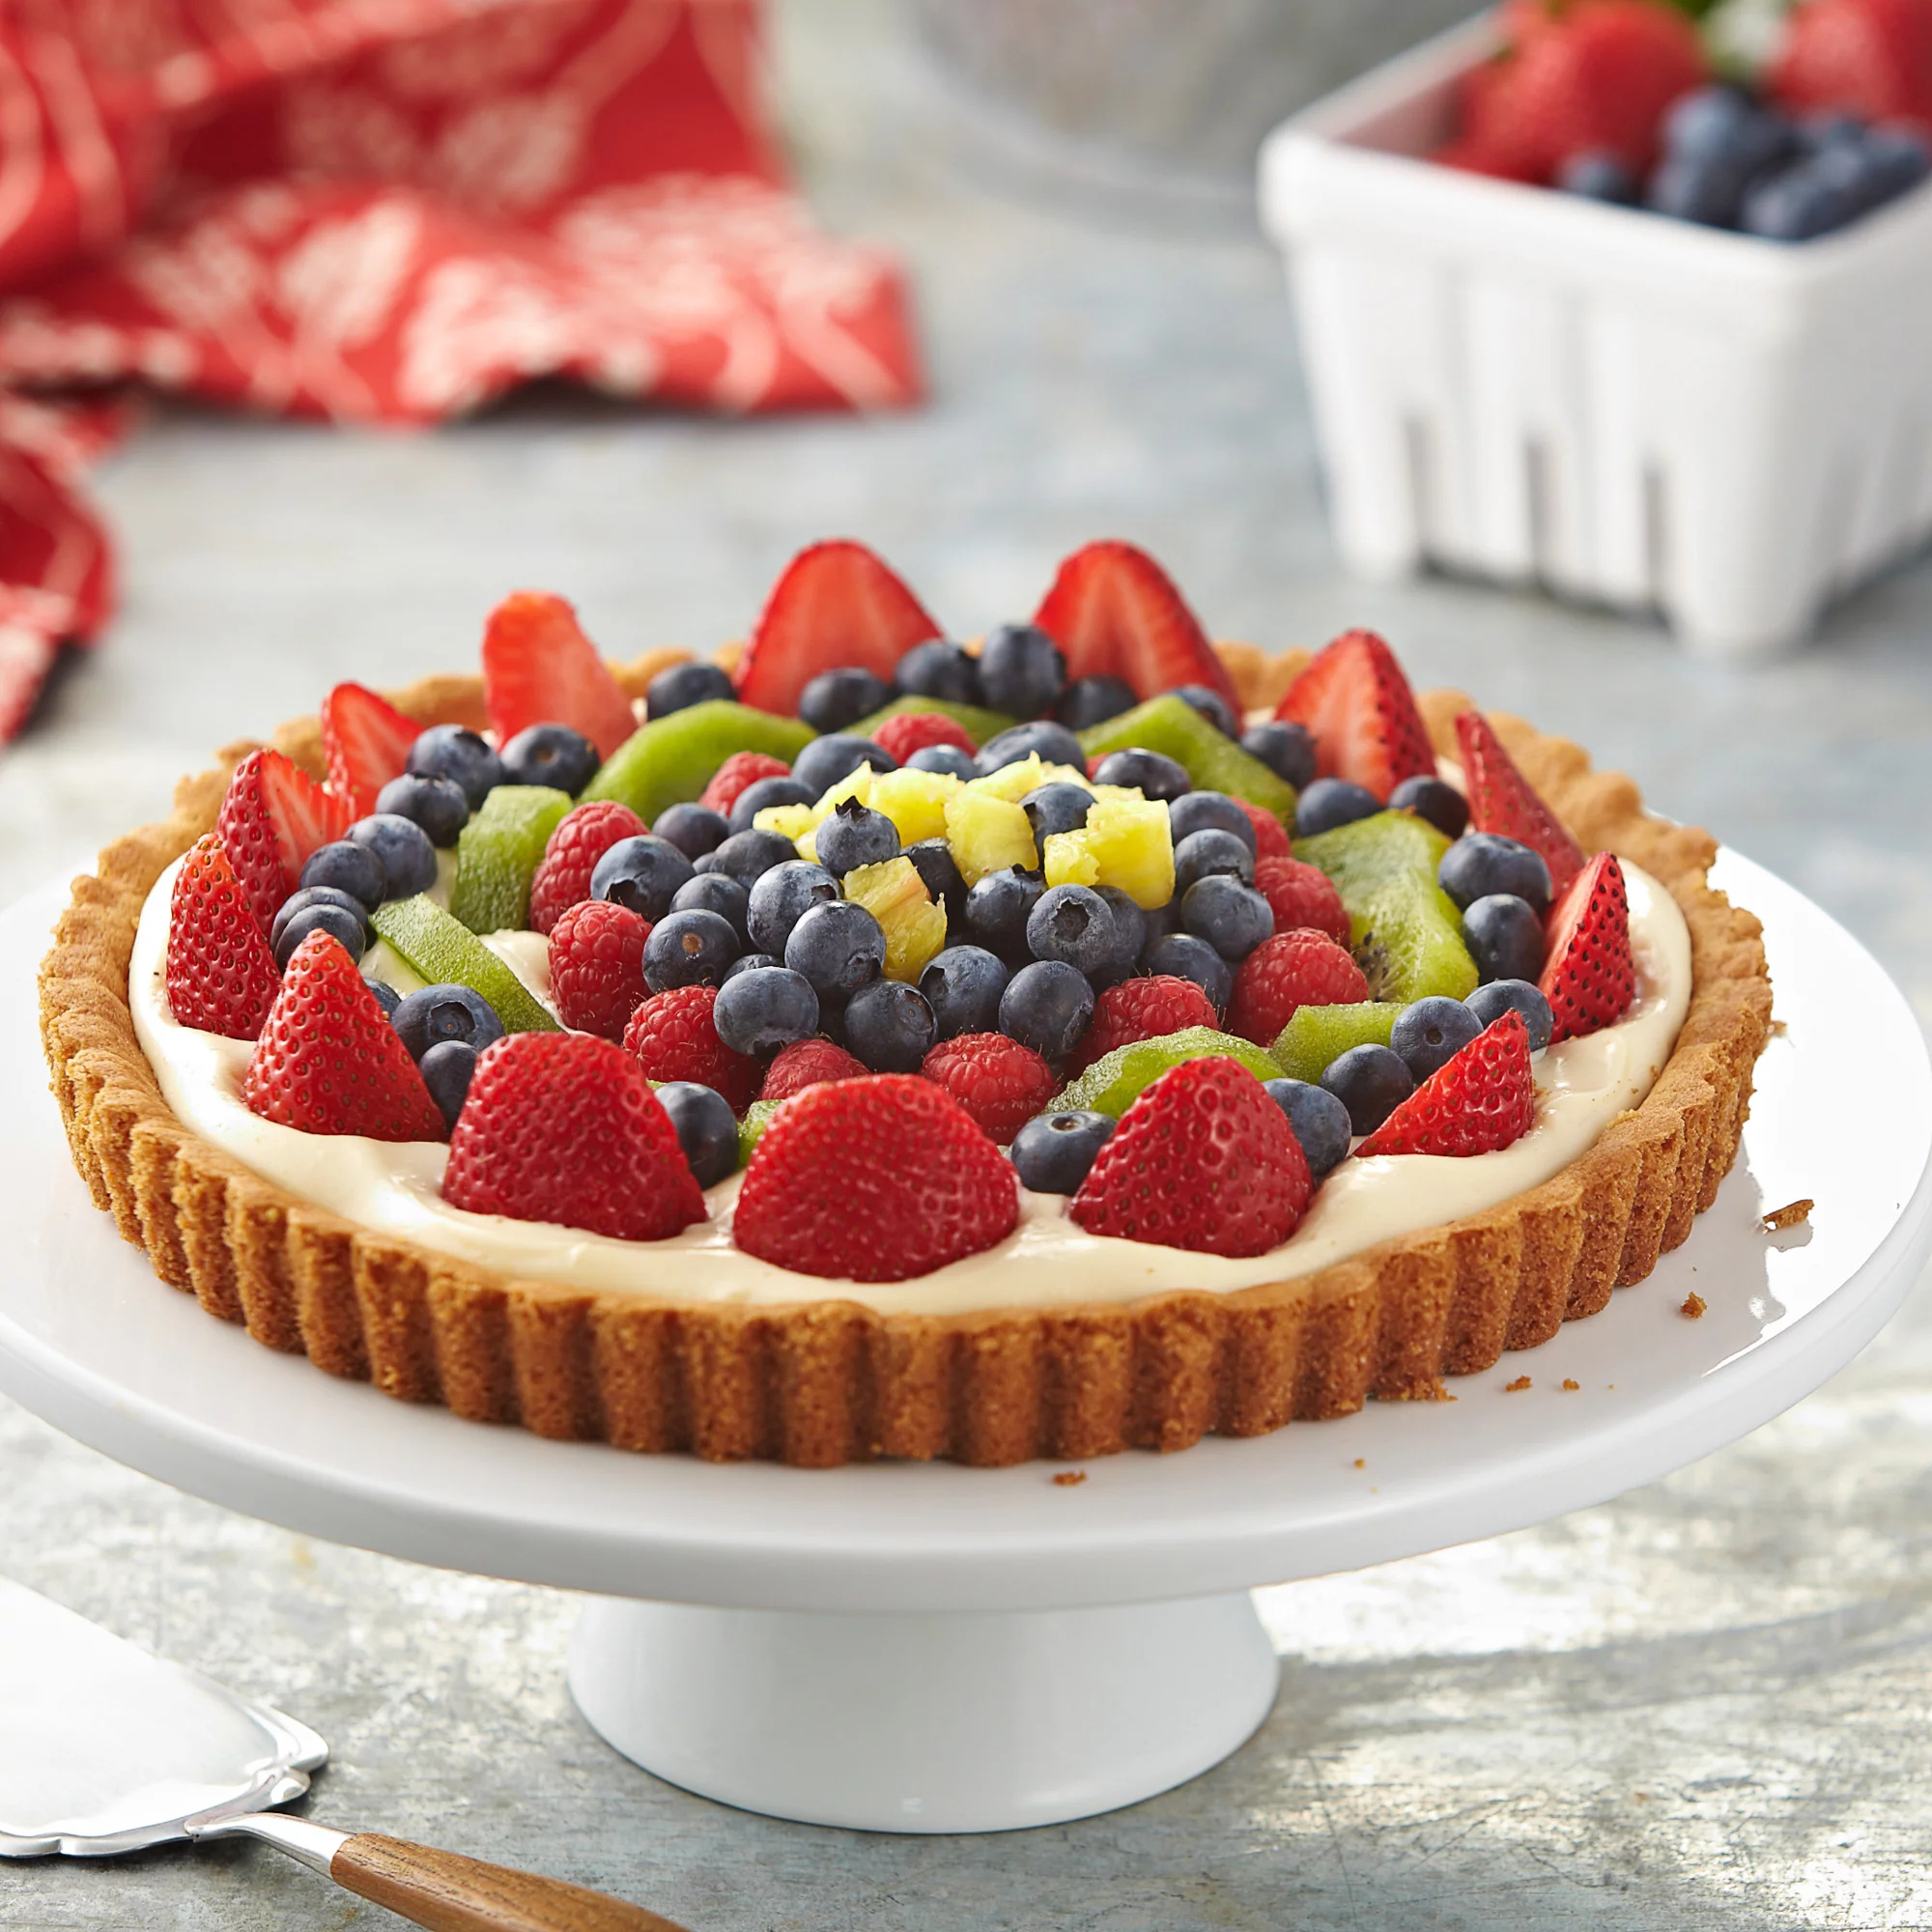 Tart: Consists of a filling of butter, sugar, syrup, and egg, baked in a pastry shell. 2000x2000 HD Background.